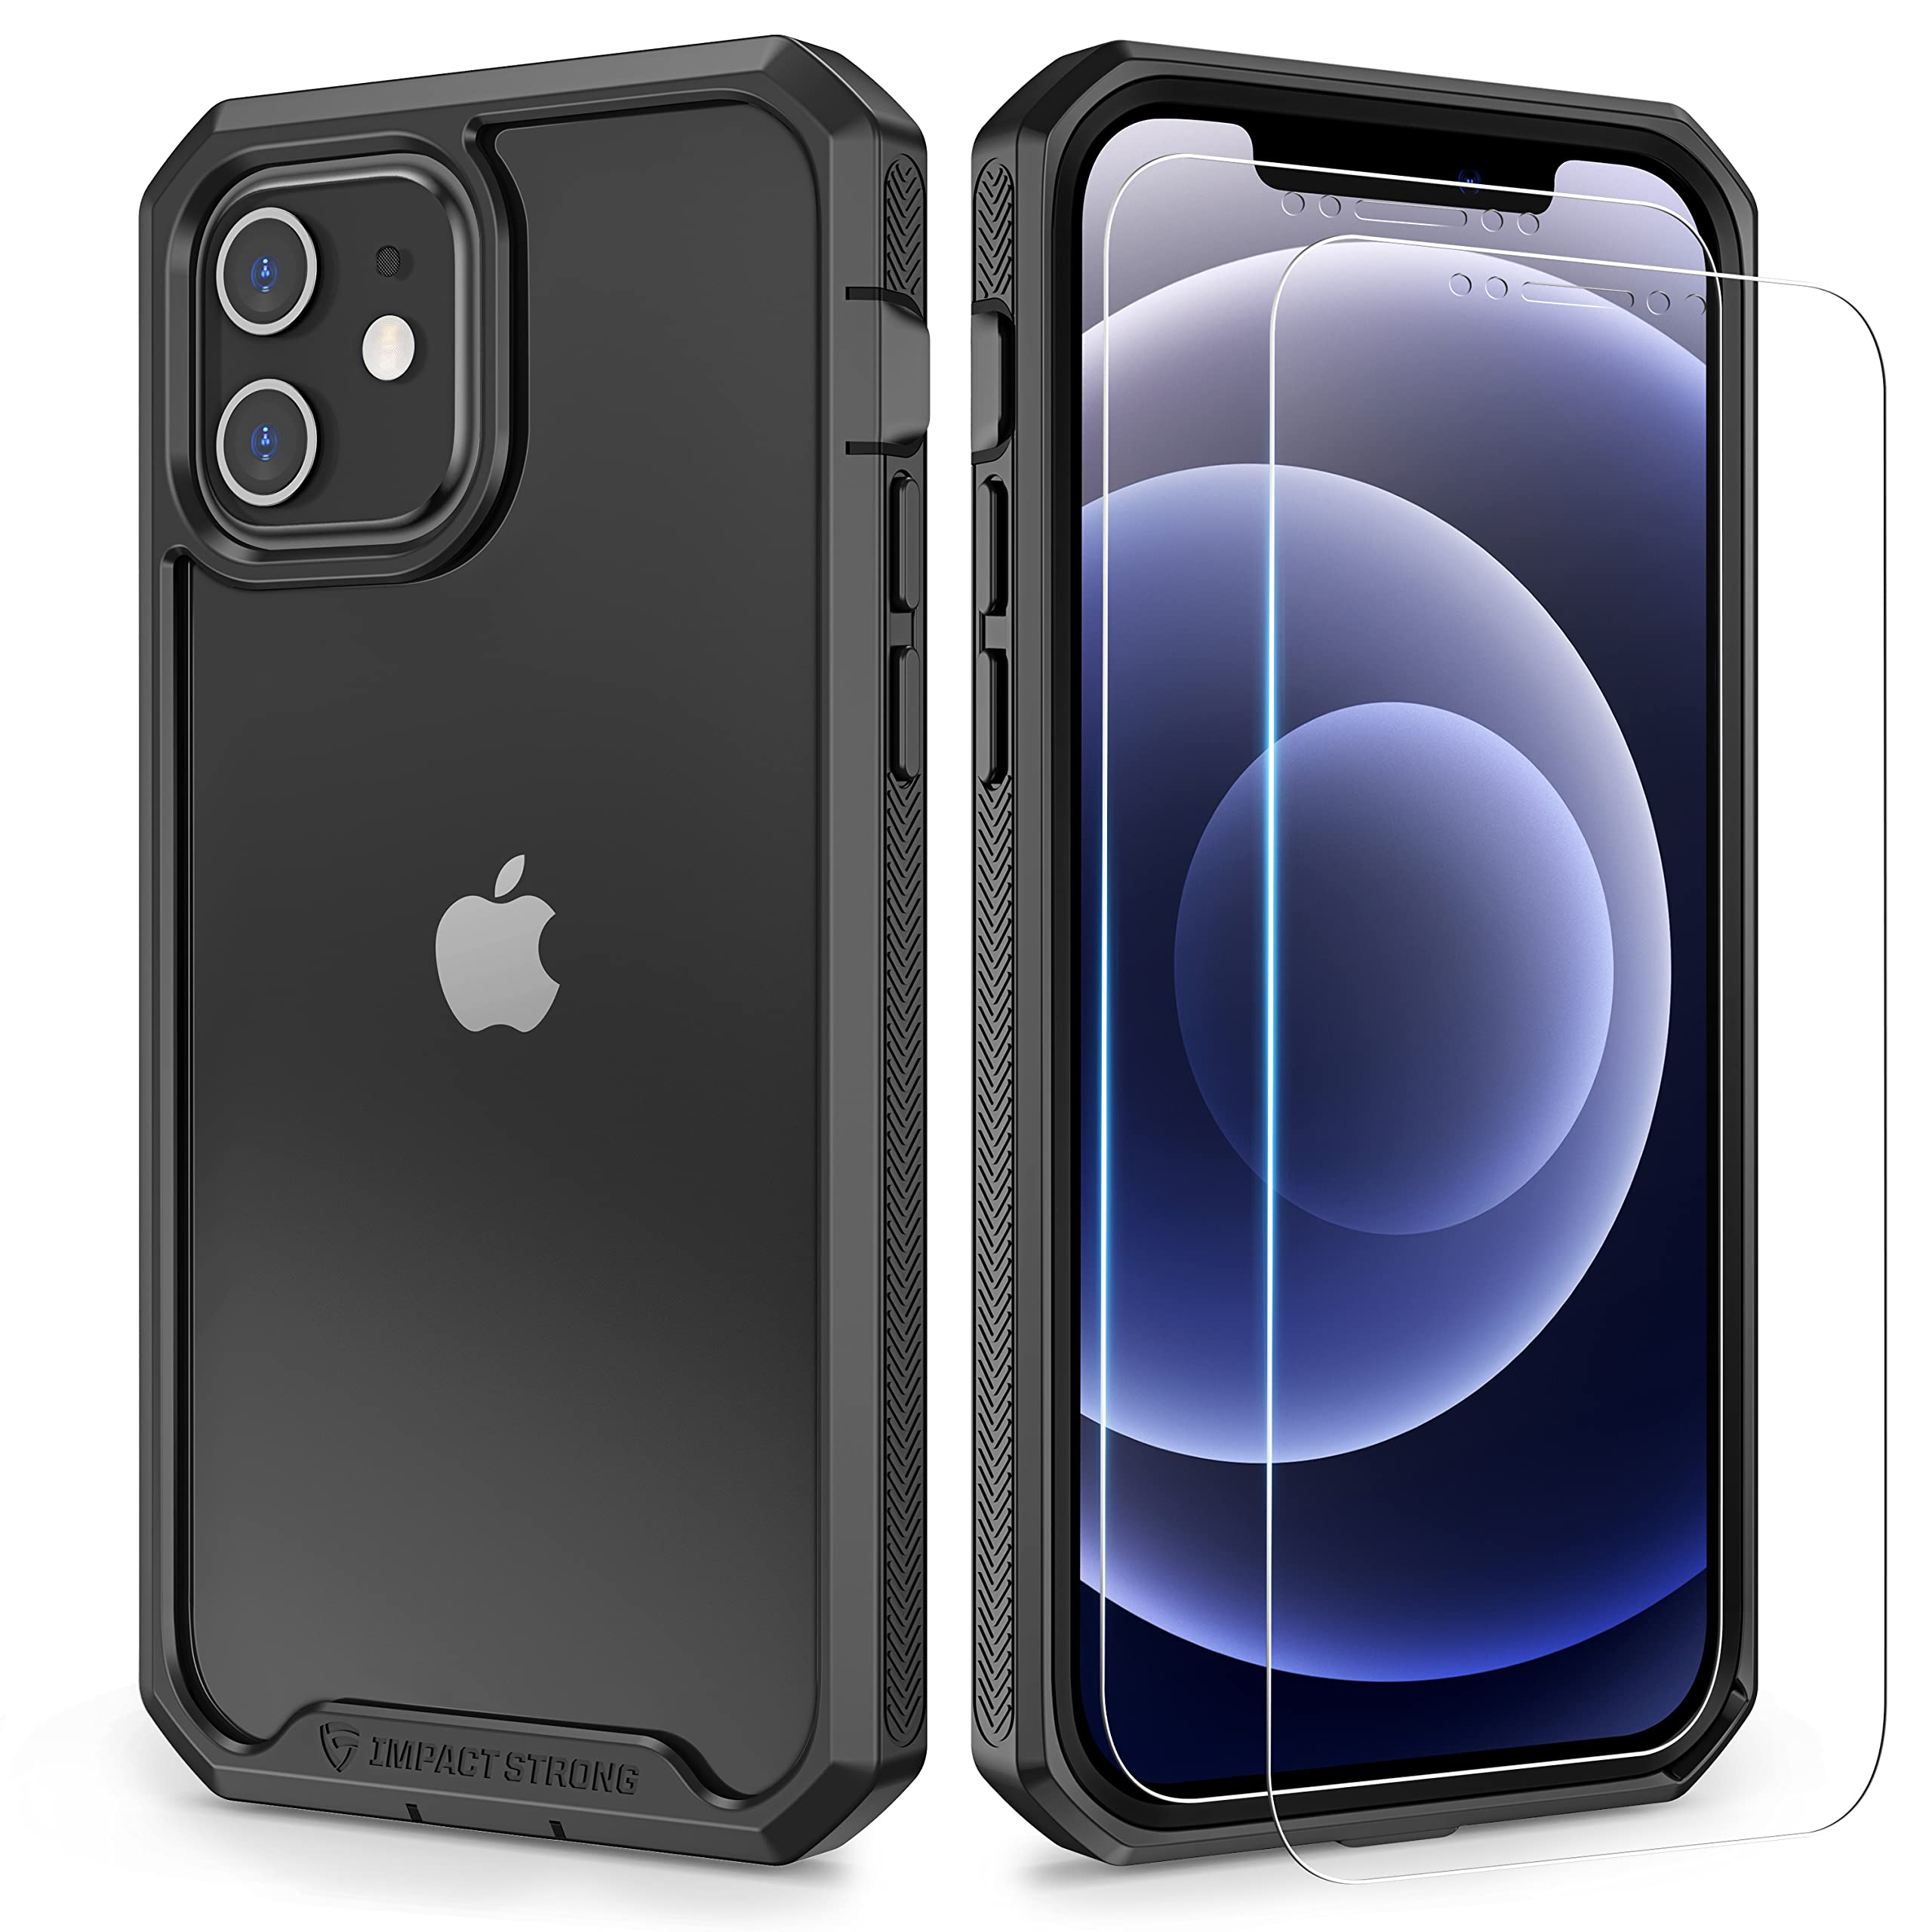 ImpactStrong Compatible with iPhone 12/12 Pro Case, Full Body Heavy Duty Protective Cover Designed for iPhone 12/12 Pro 6.1-Inch (2X Glass Screen Protector Included) - Black